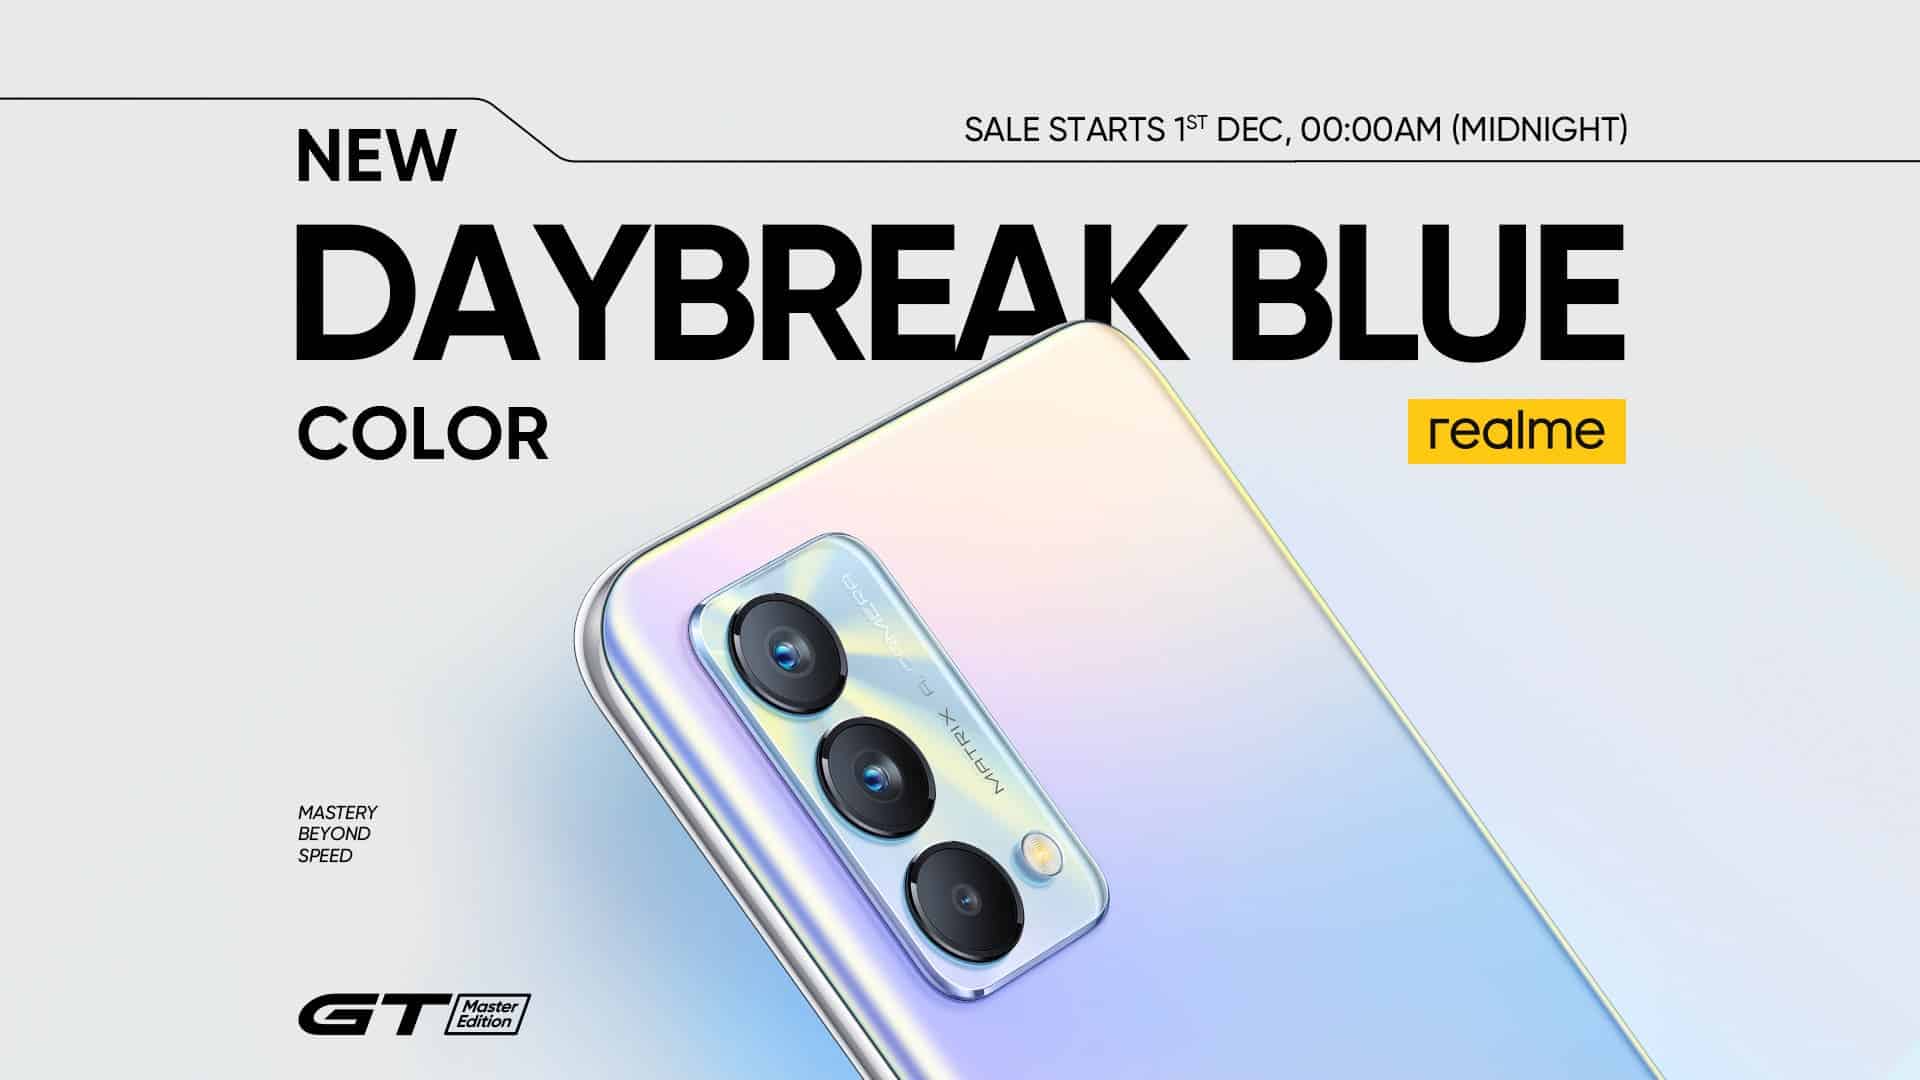 Realme GT Master Edition Daybreak Blue Option Will Be Available